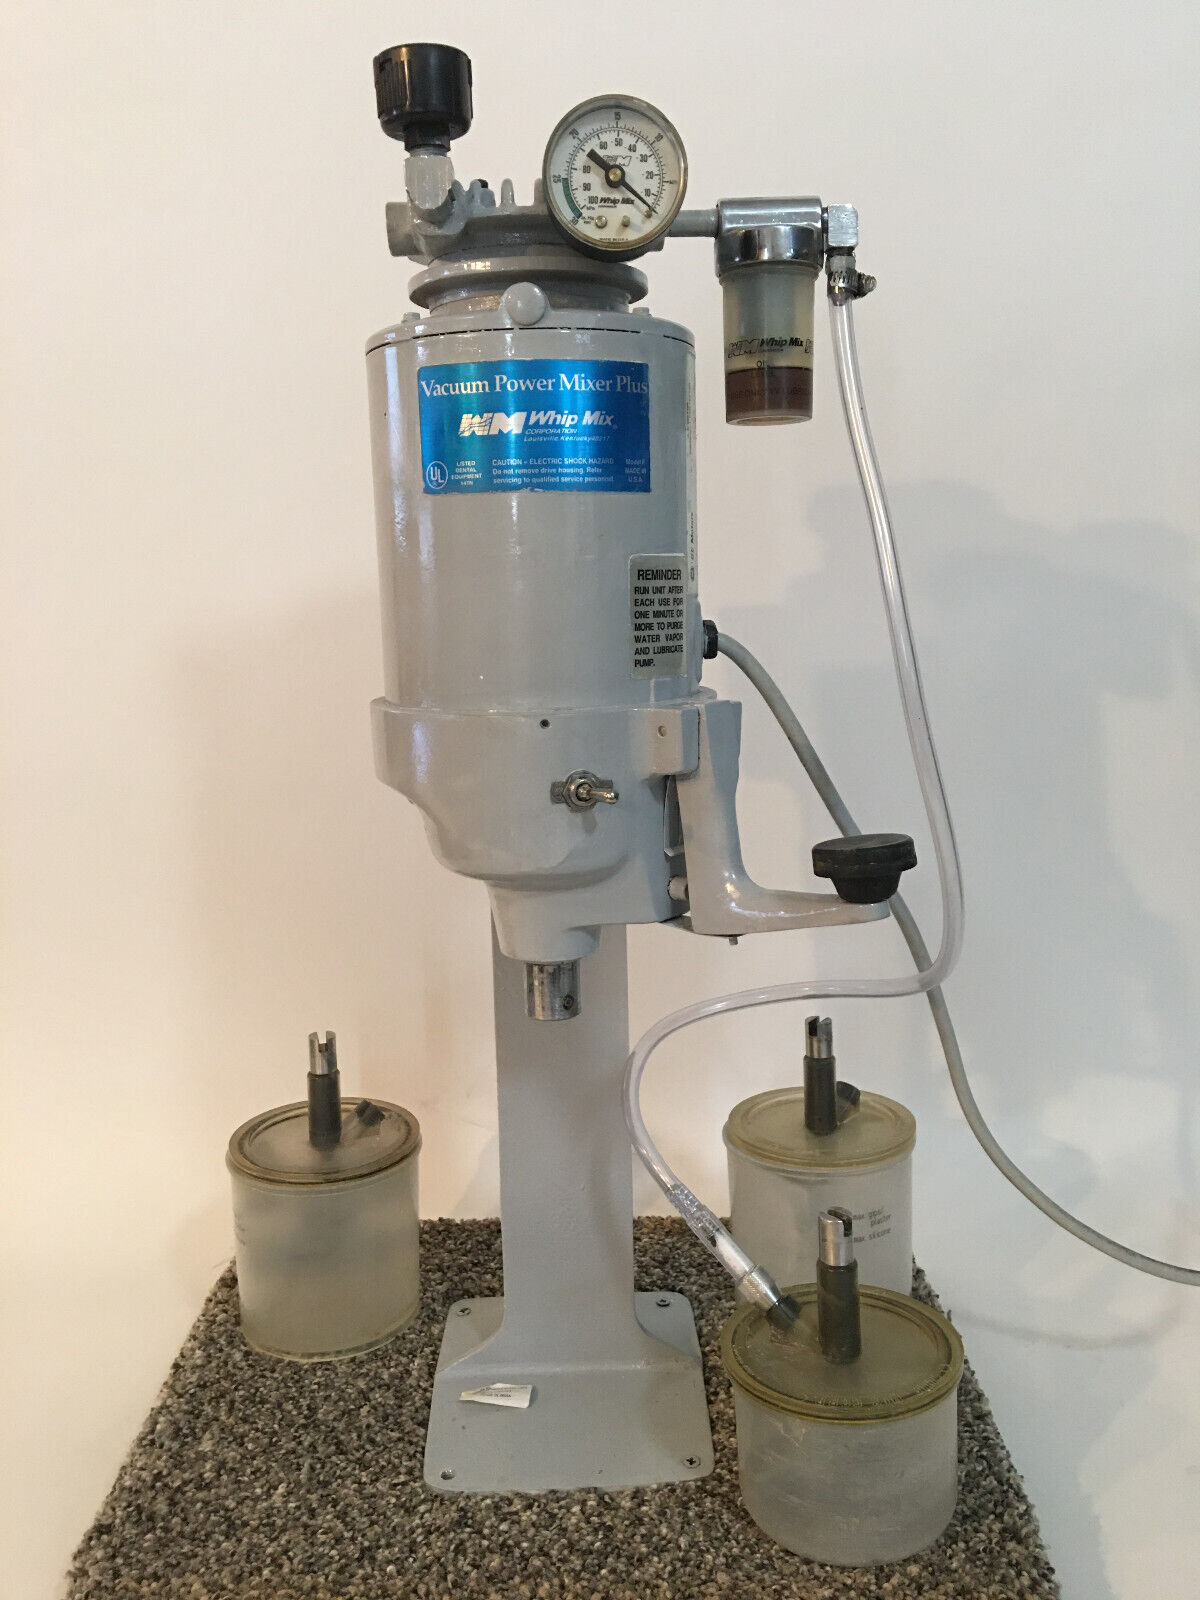 Whip Mix Vacuum Power Mixer Plus Model F with Stand - Dental lab KK581